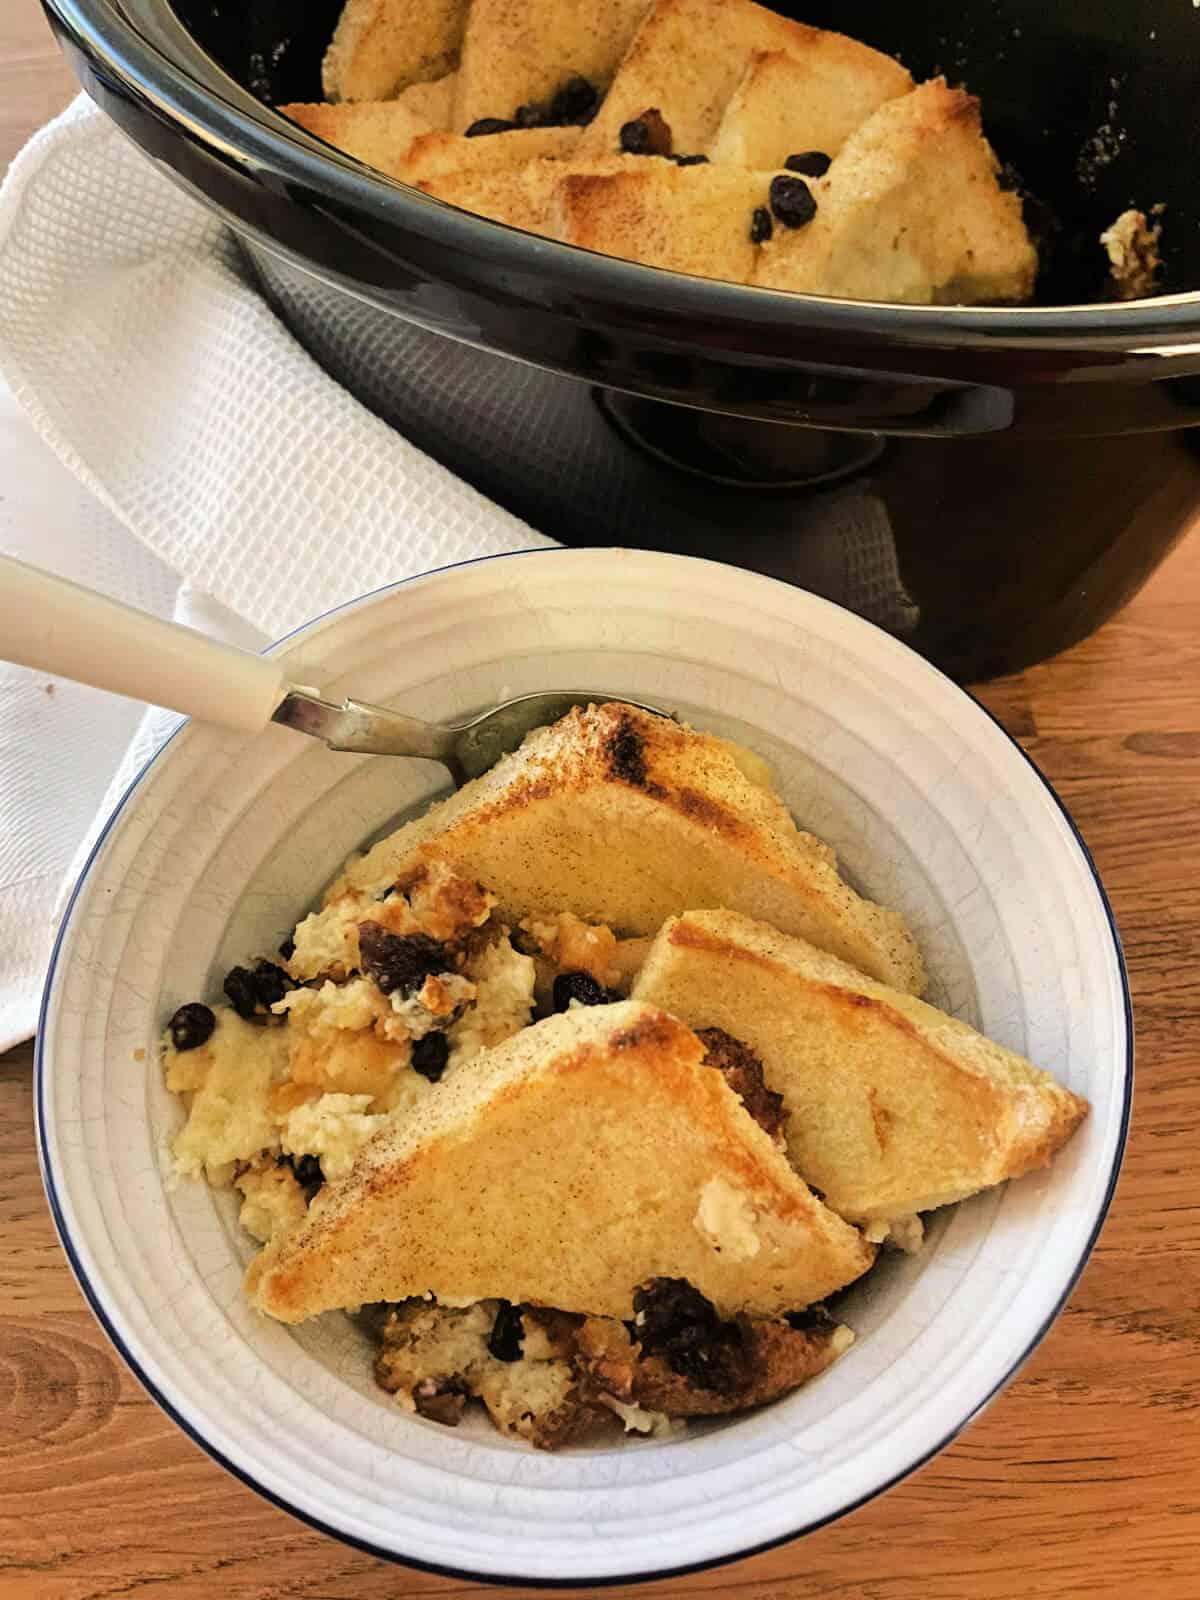 Bowl of bread and butter pudding next to slow cooker serving pot.